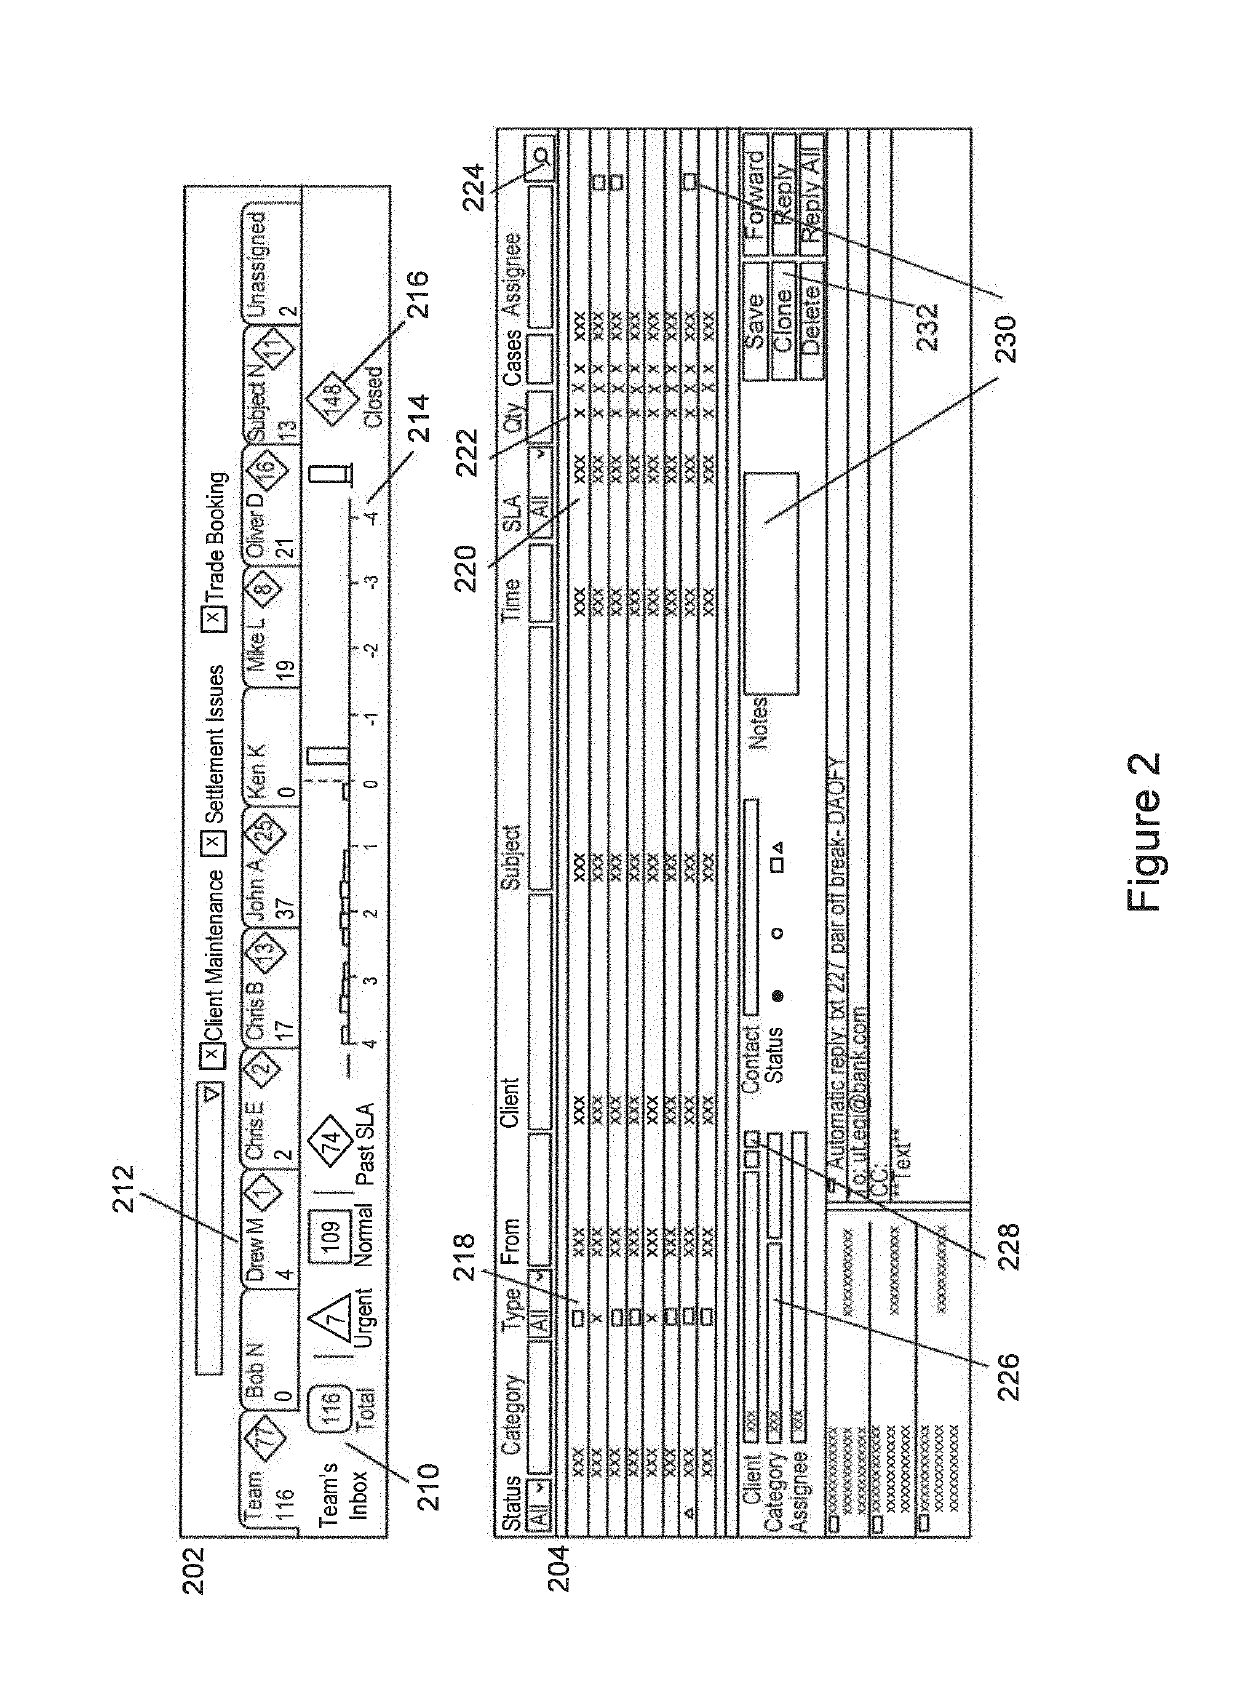 System and method for implementing an intelligent customer service query management and routing system